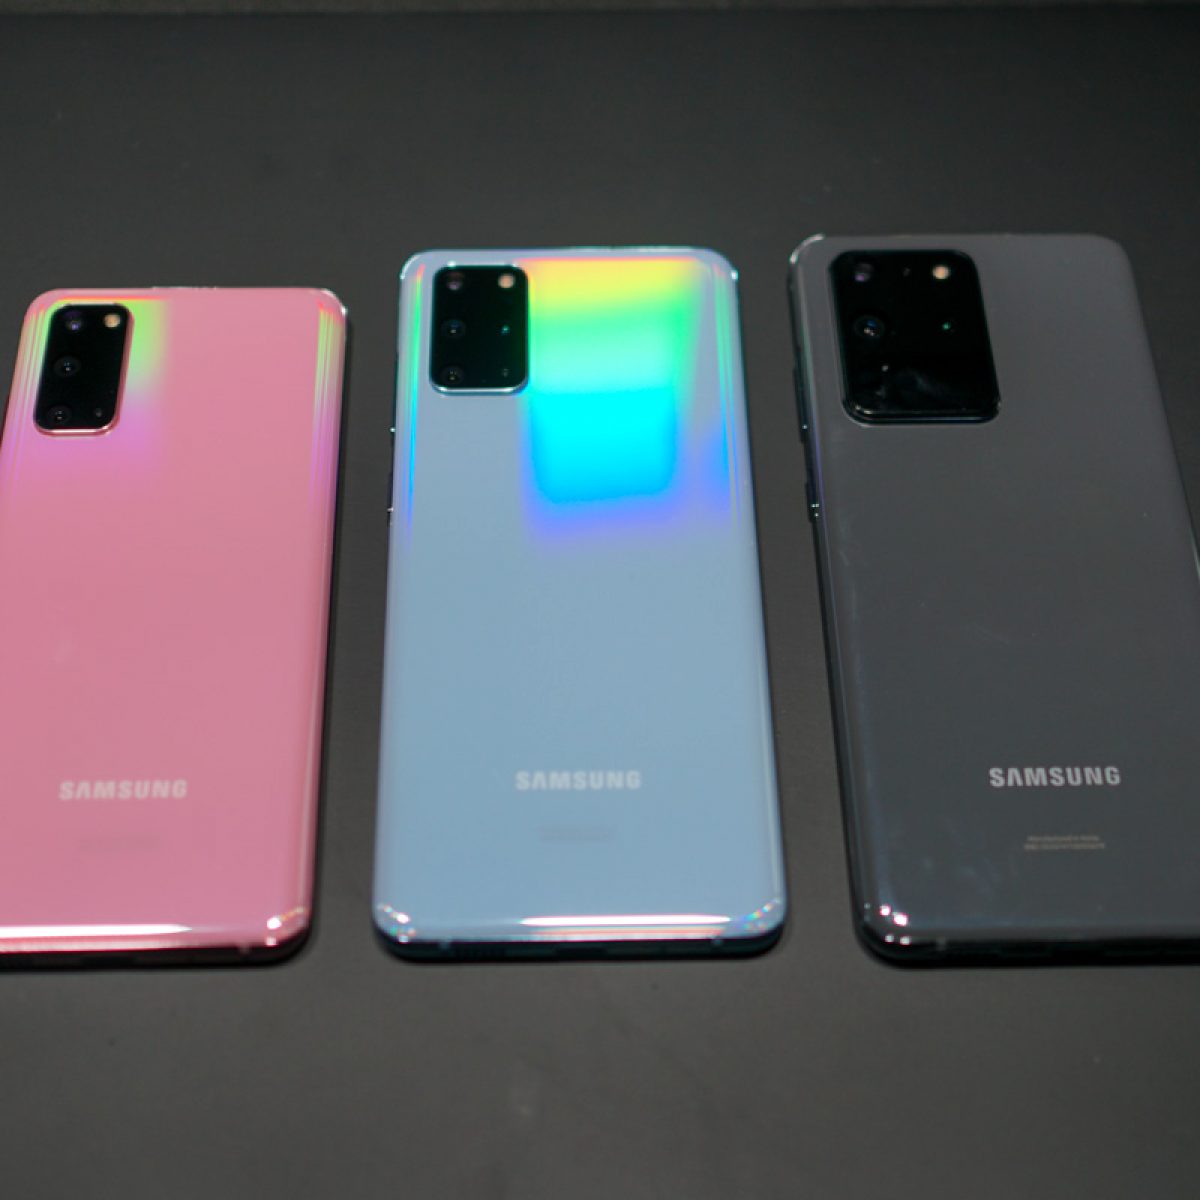 Galaxy Note 10 Plus: So far I'm undecided and here's why